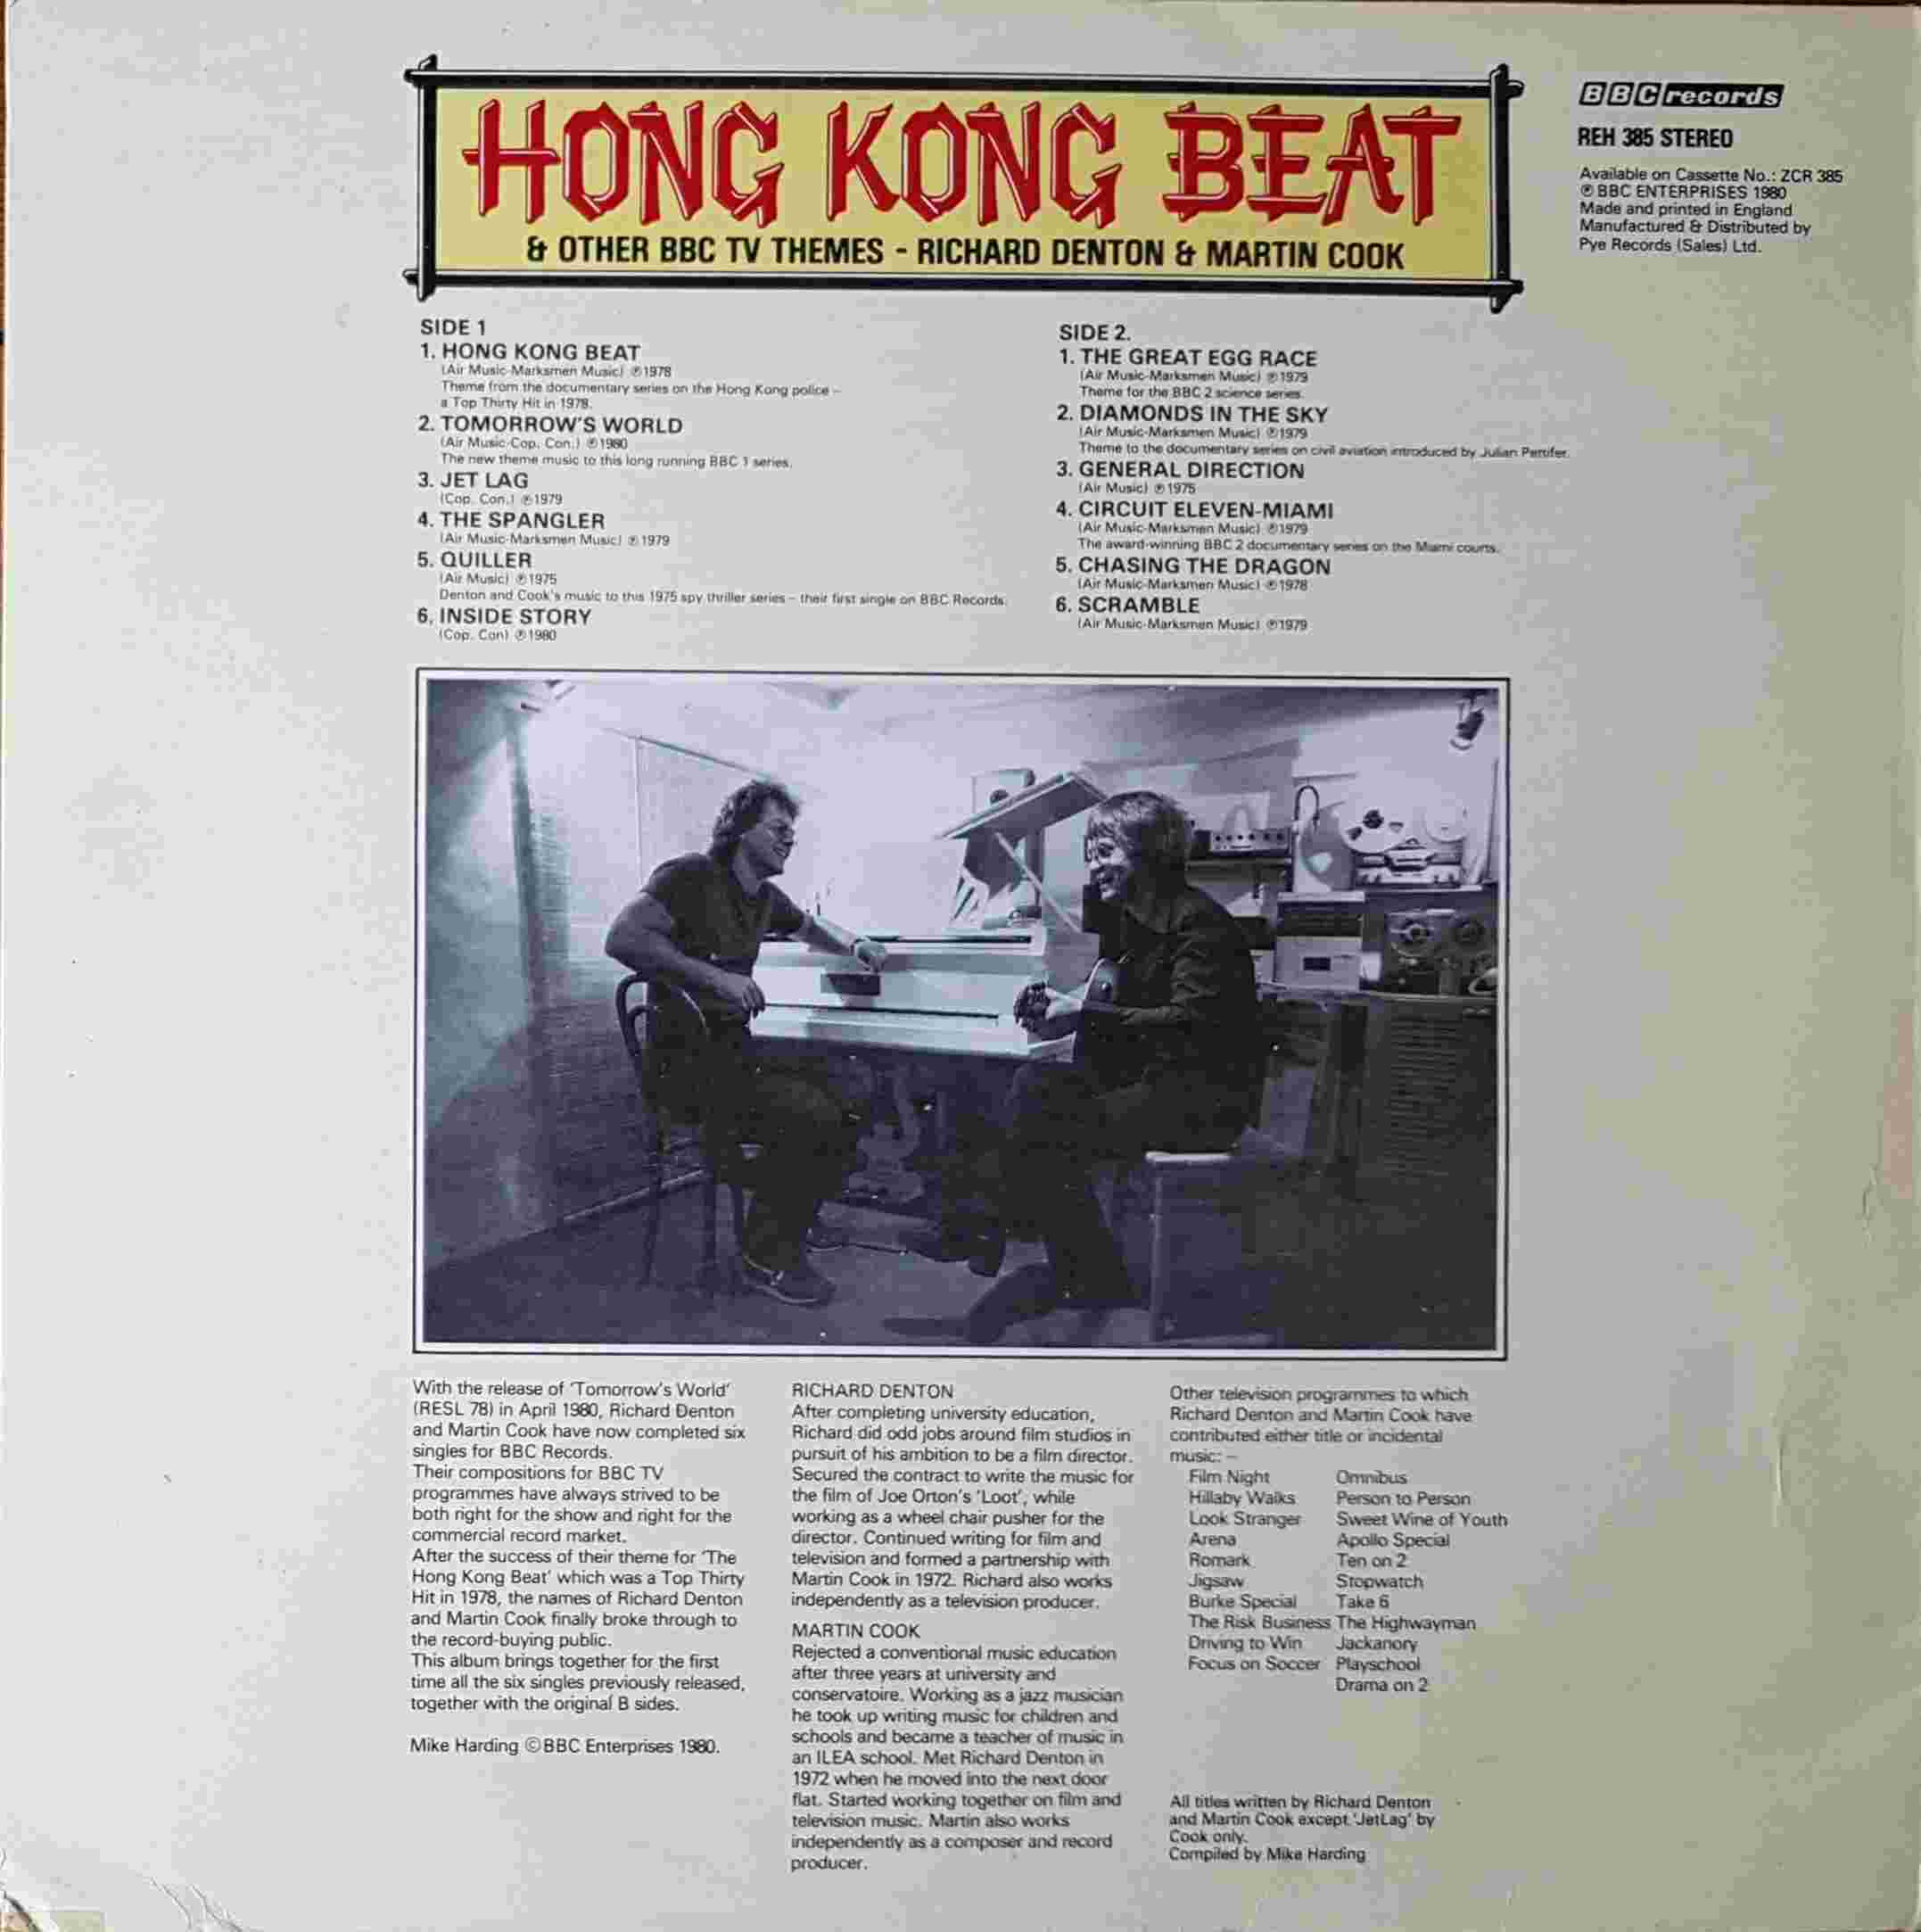 Picture of REH 385 Hong Kong beat and other BBC TV themes by artist Various from the BBC records and Tapes library